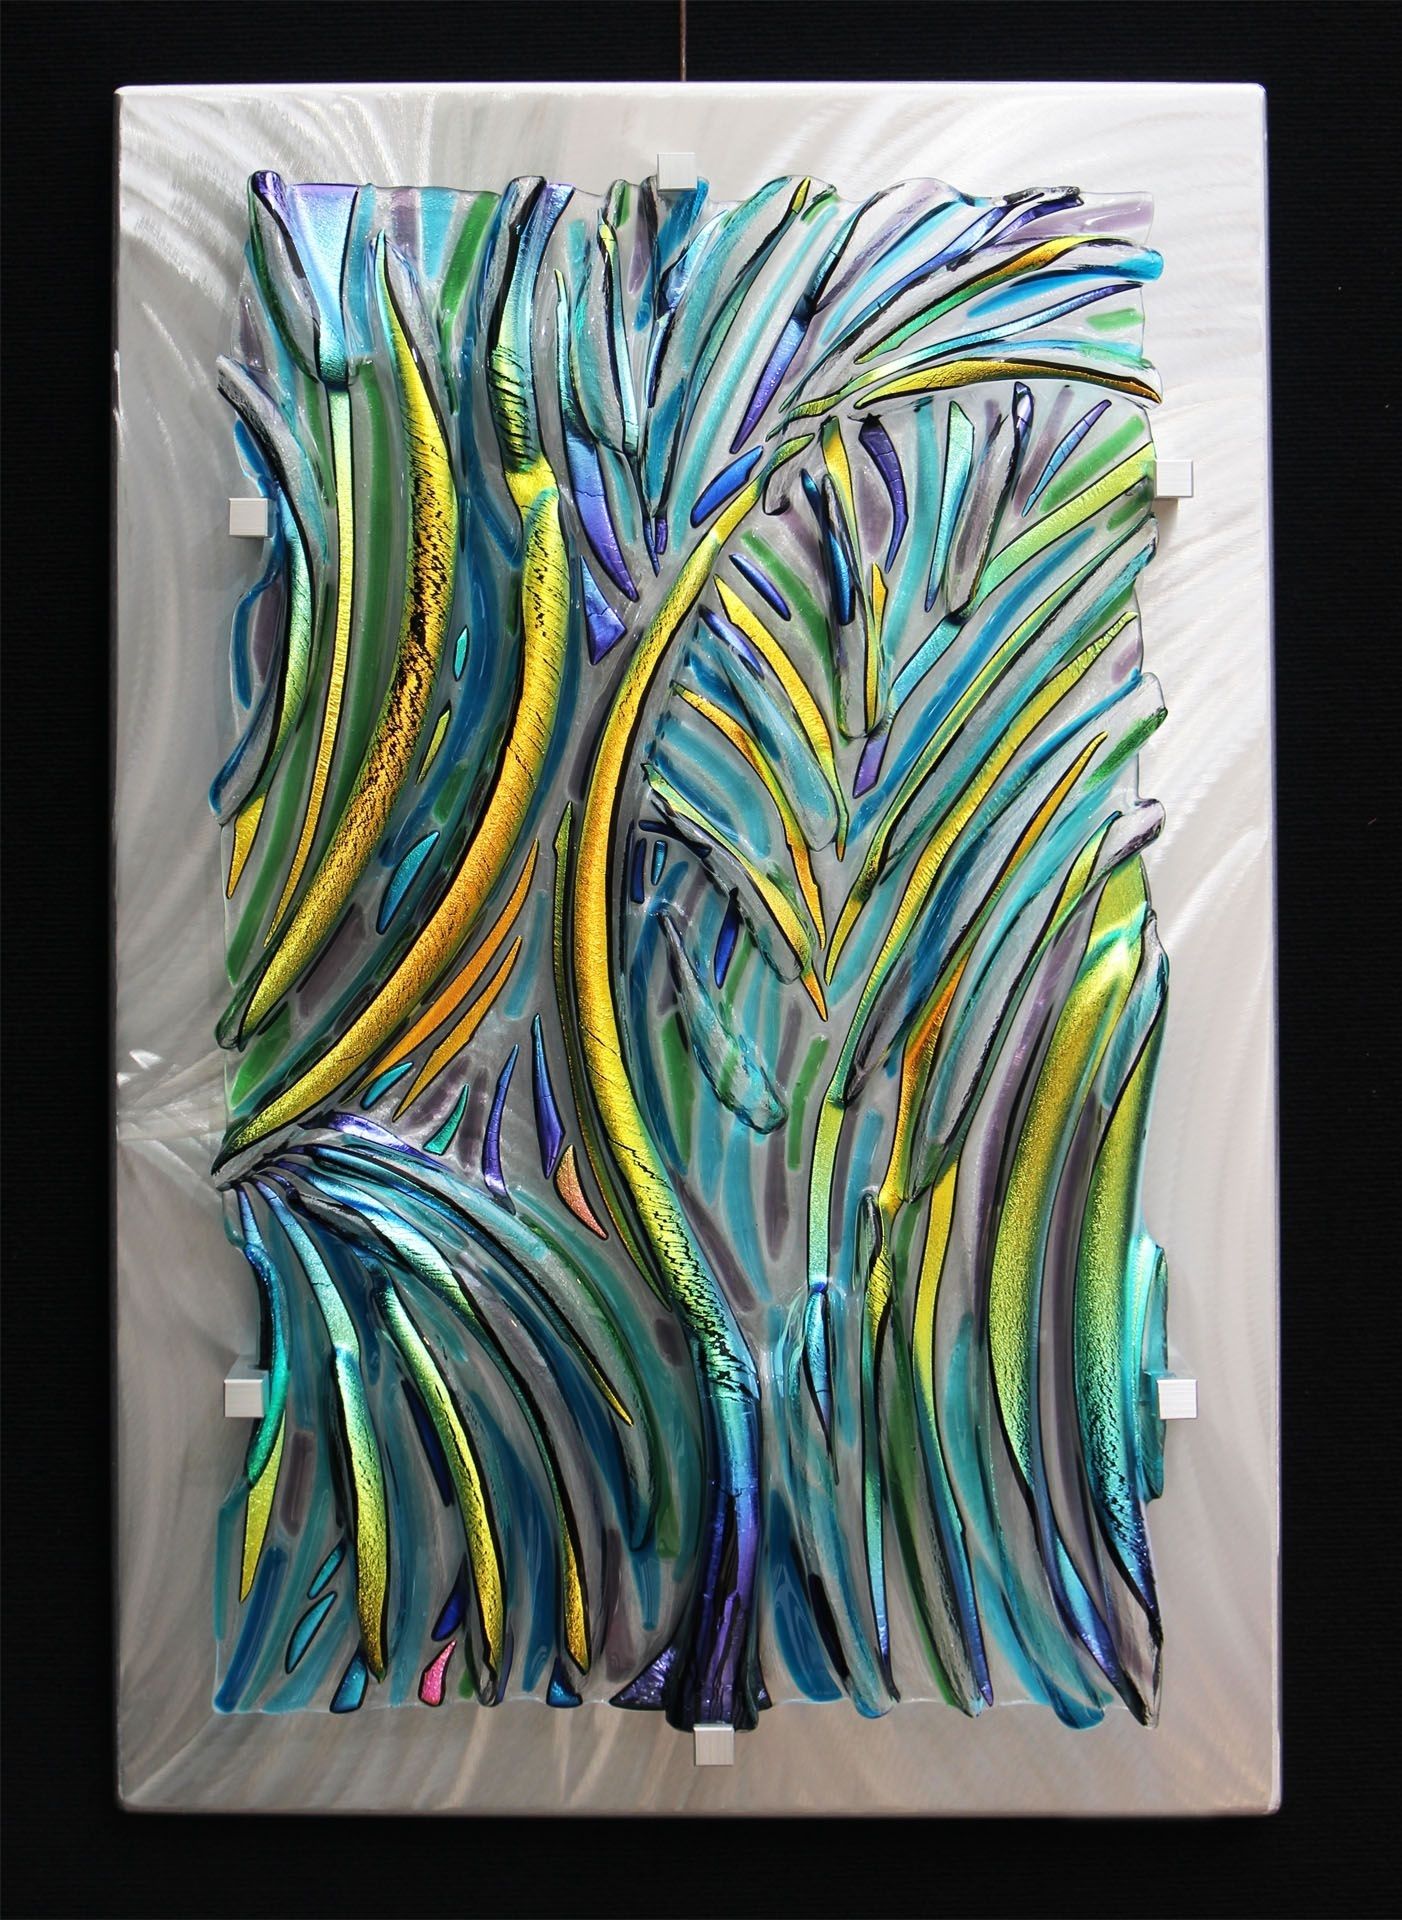 Fused Glass Wall Artfrank Thompson | I Love Glass Intended For Most Up To Date Abstract Fused Glass Wall Art (View 1 of 20)